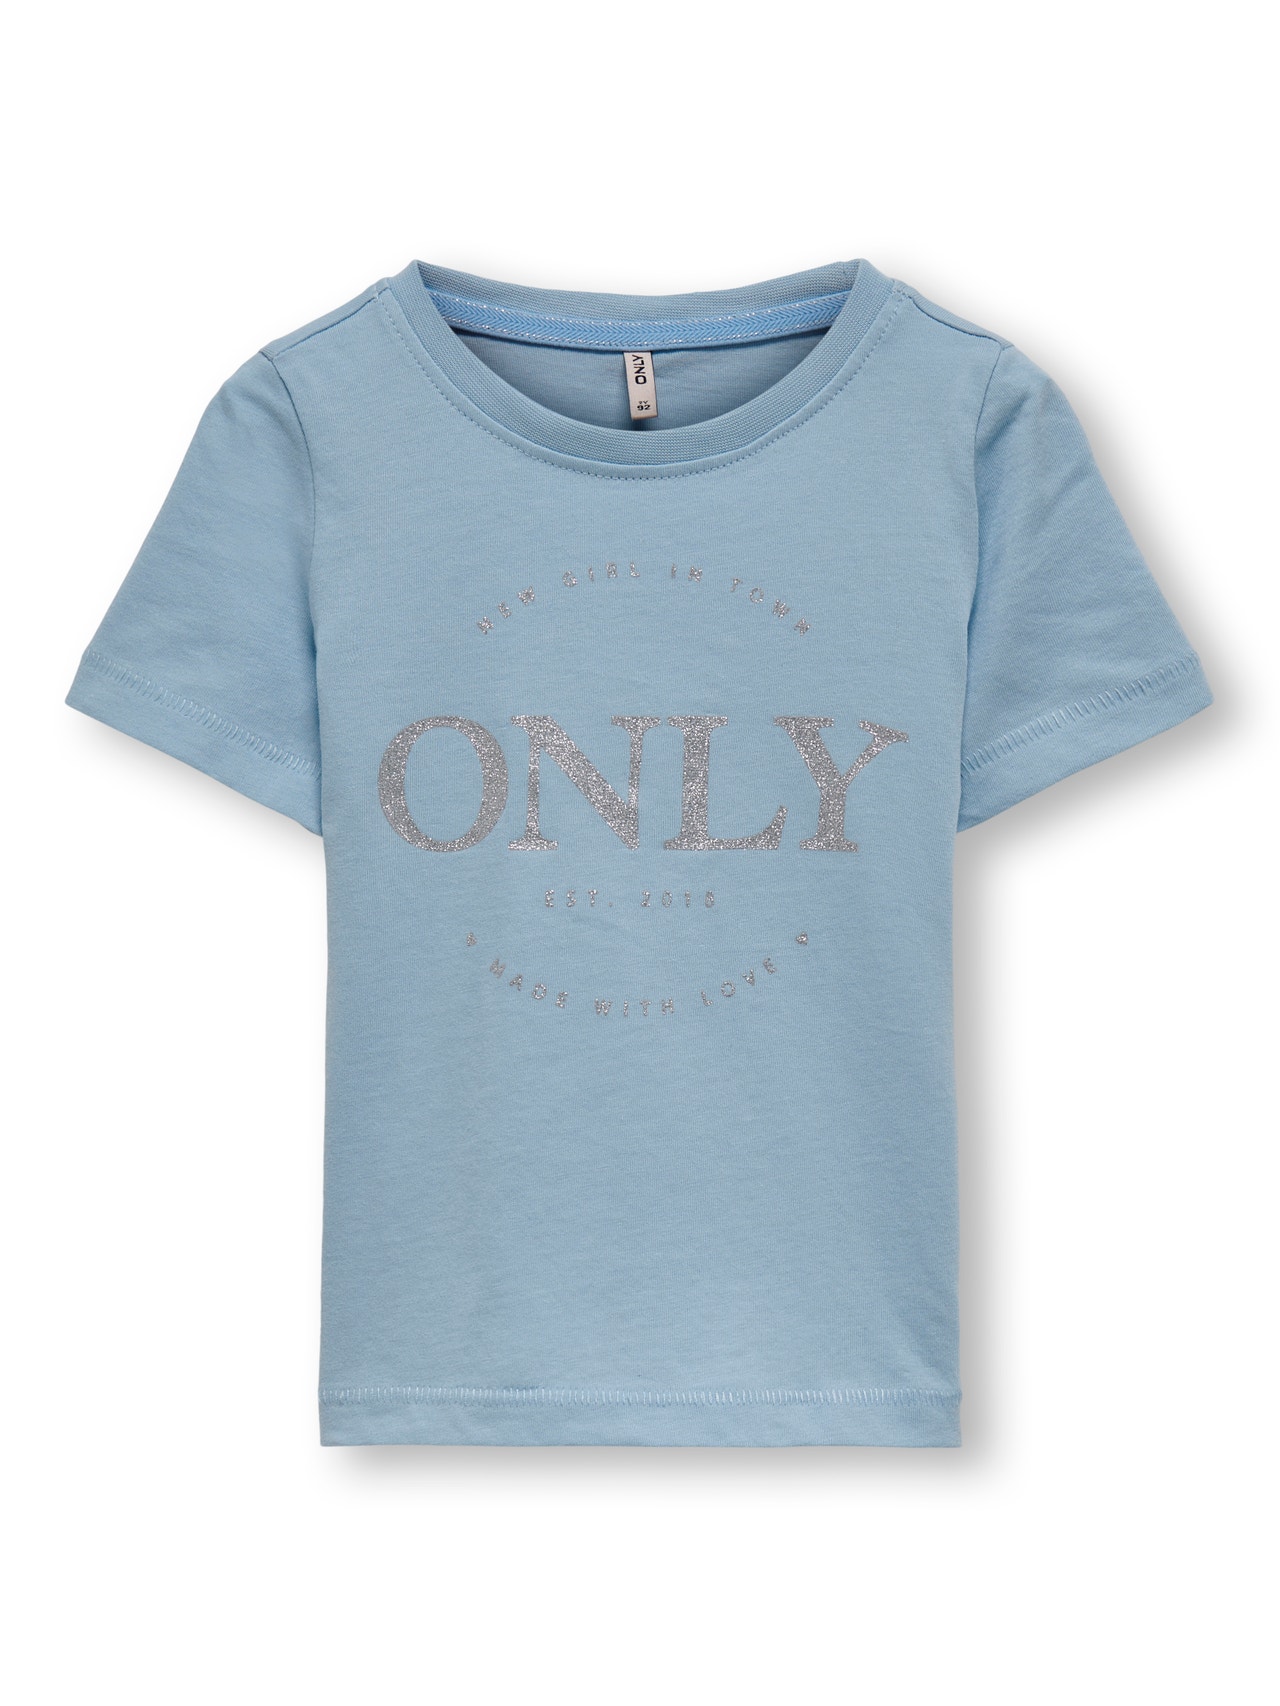 ONLY Mini logo printed T-shirt -Cashmere Blue - 15250807